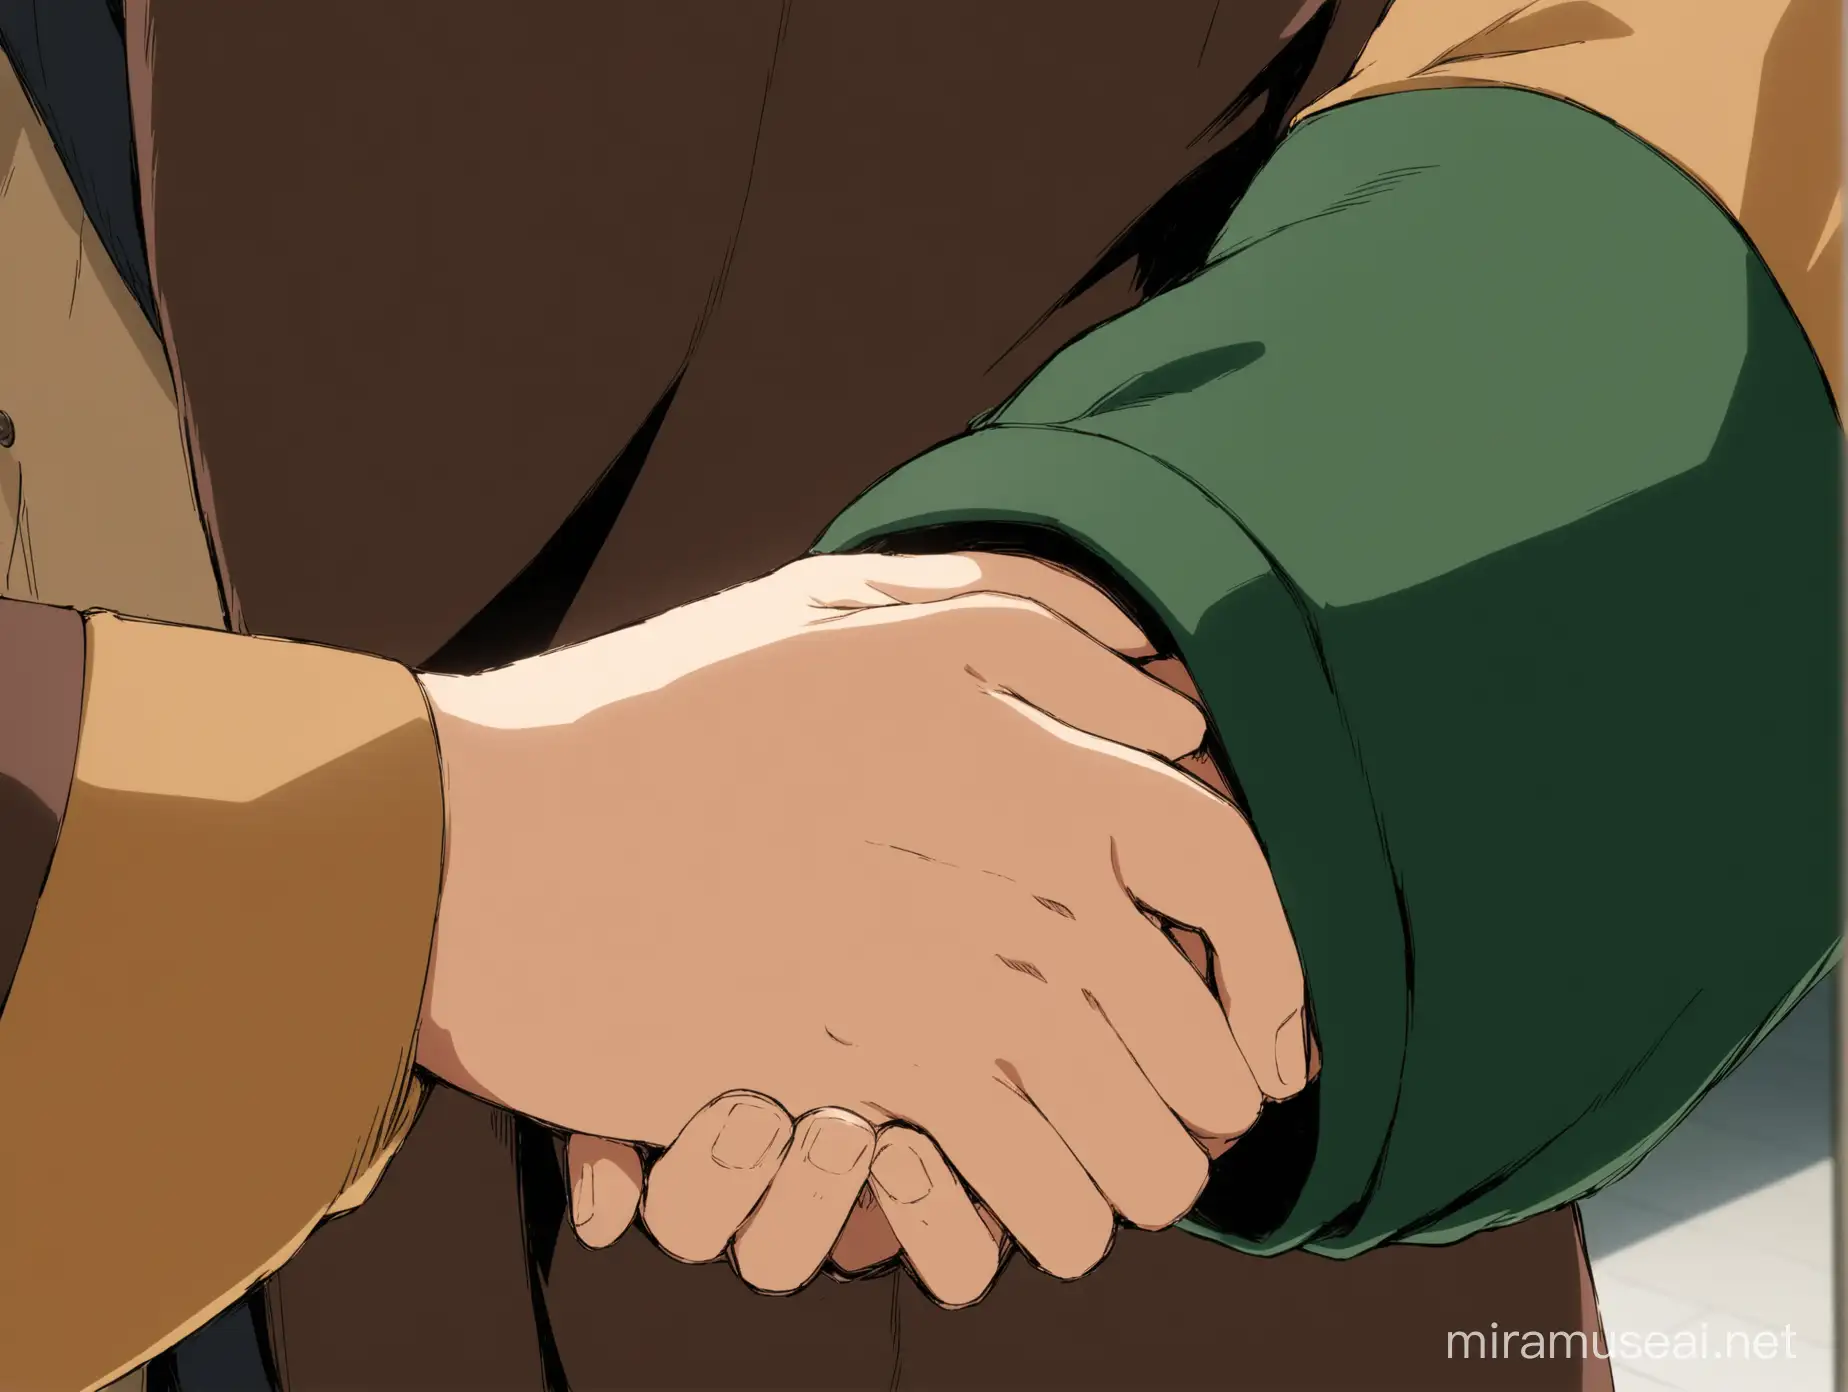 An image of a hand of an anime character wearing brown detective clothes pushing another anime character wearing dark green hoodie